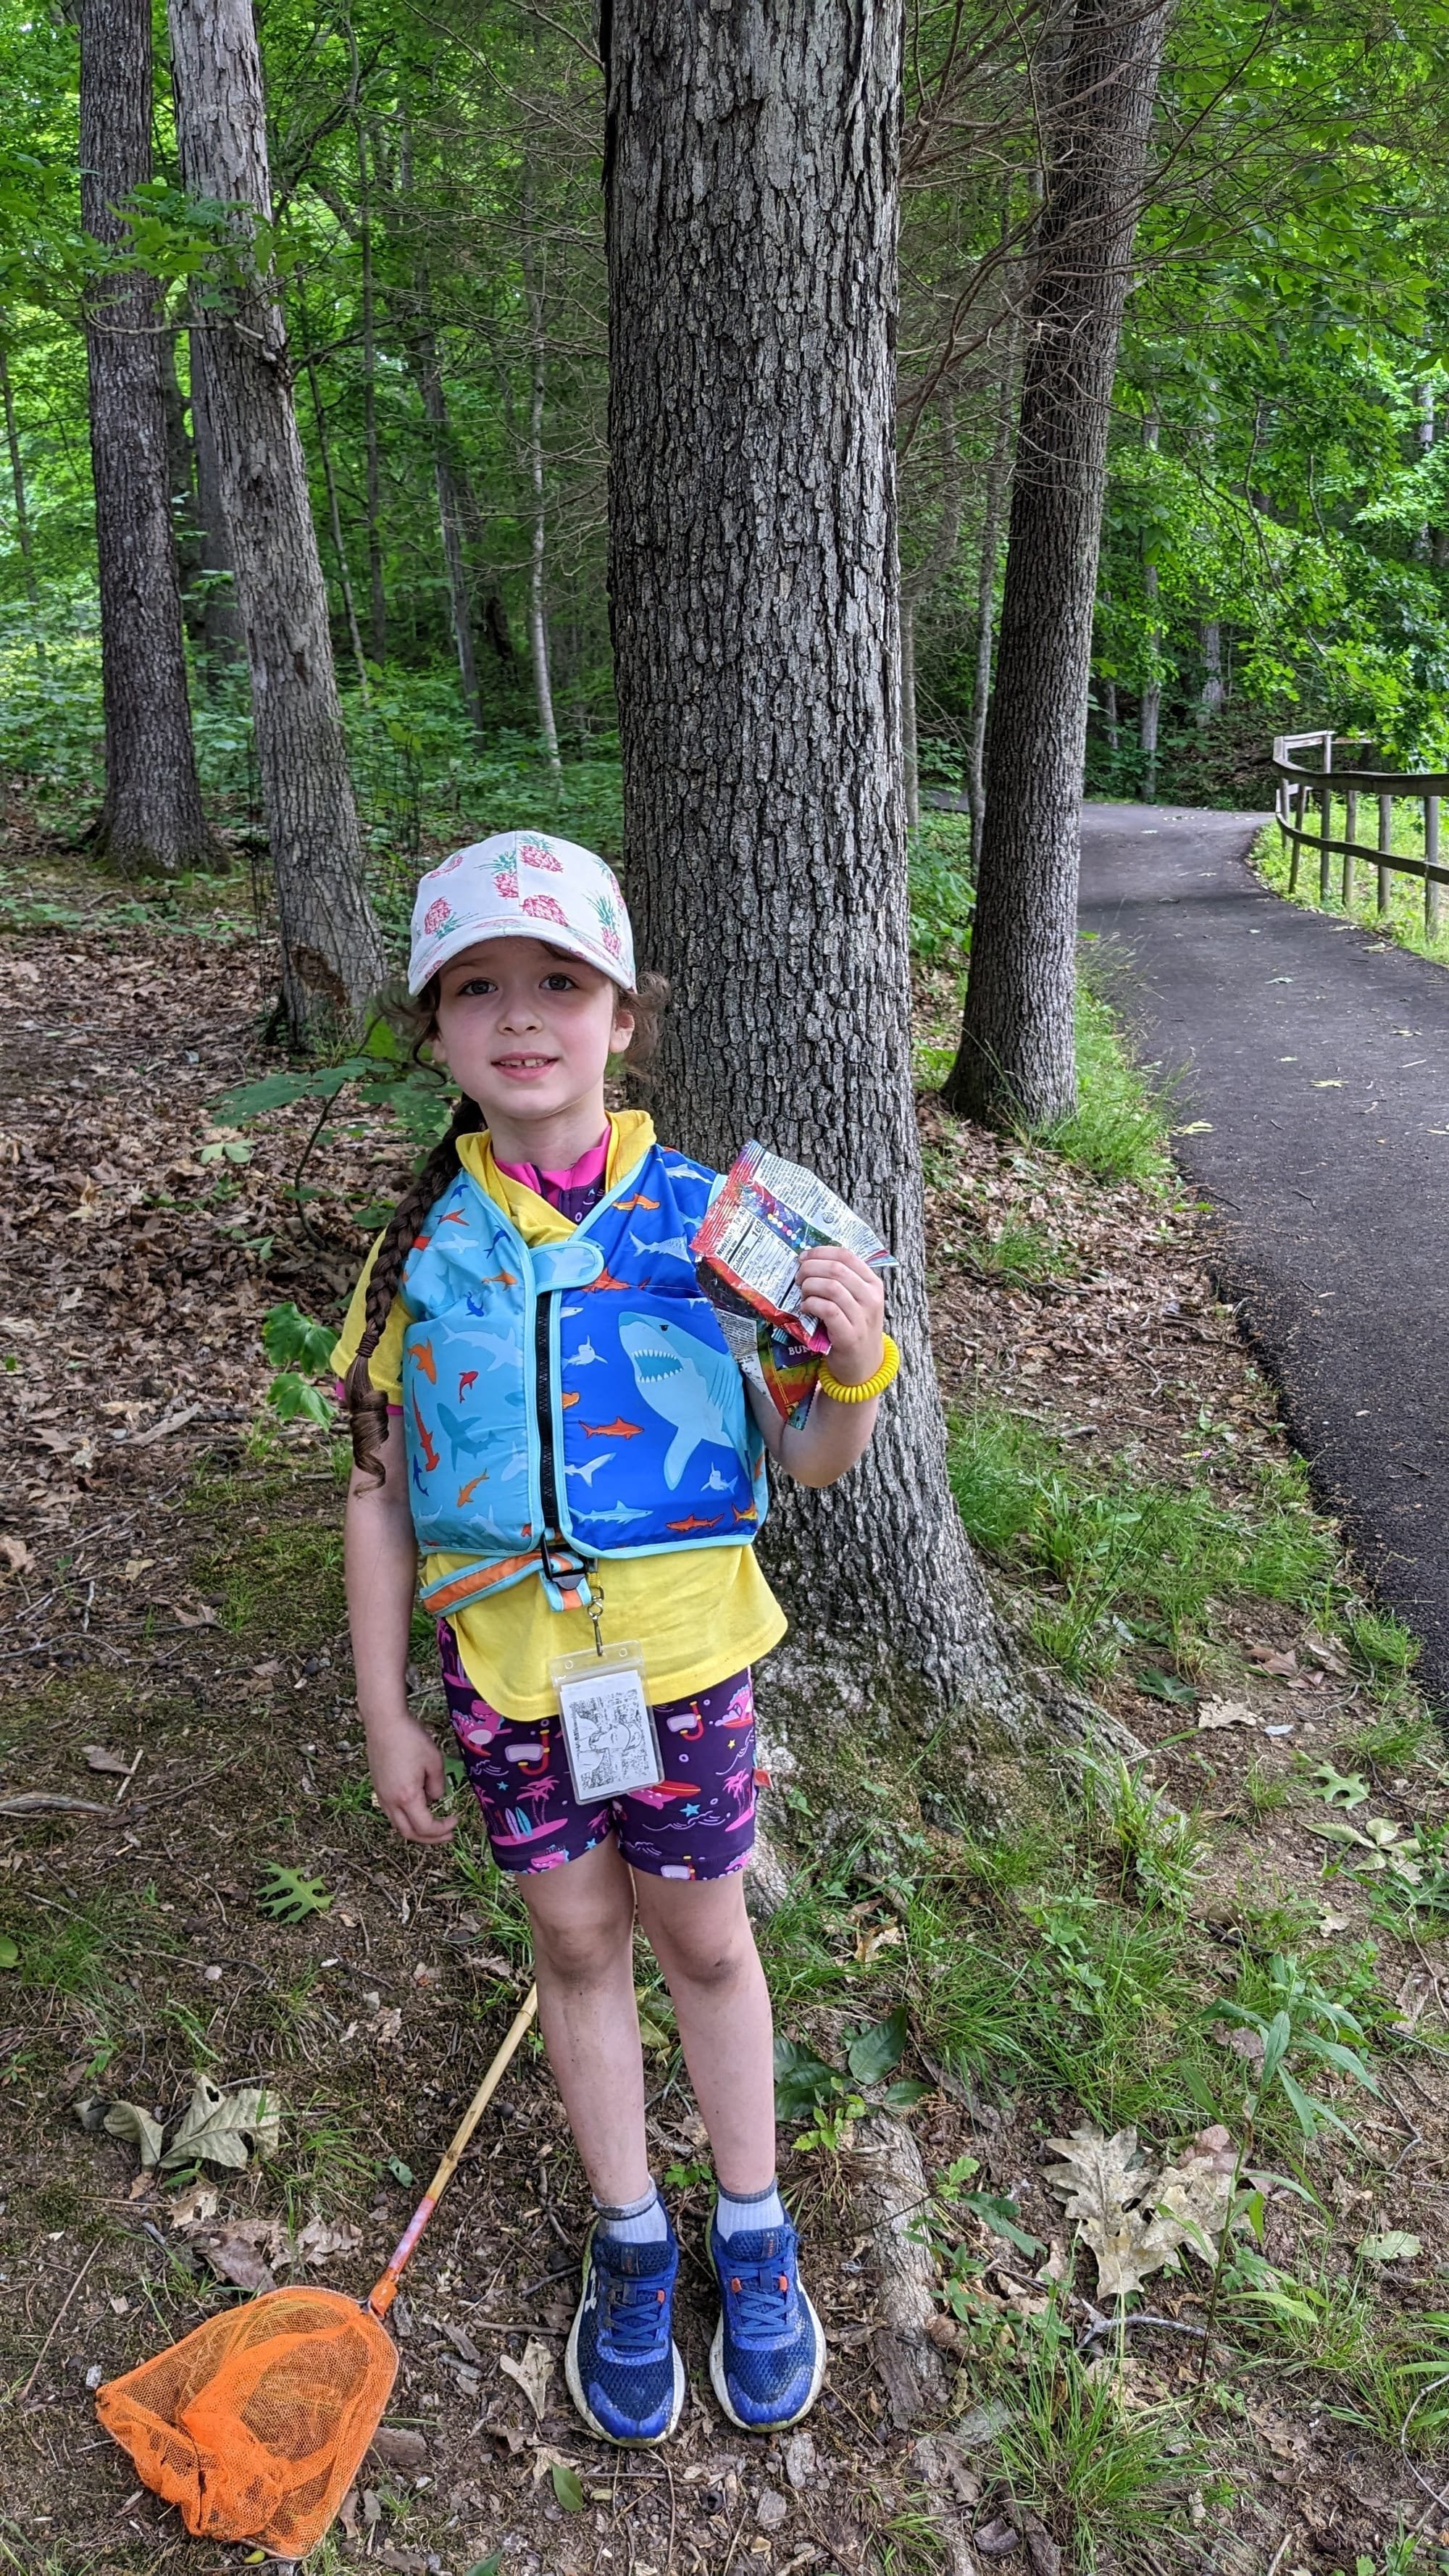 Emma on the Clean Trail Team